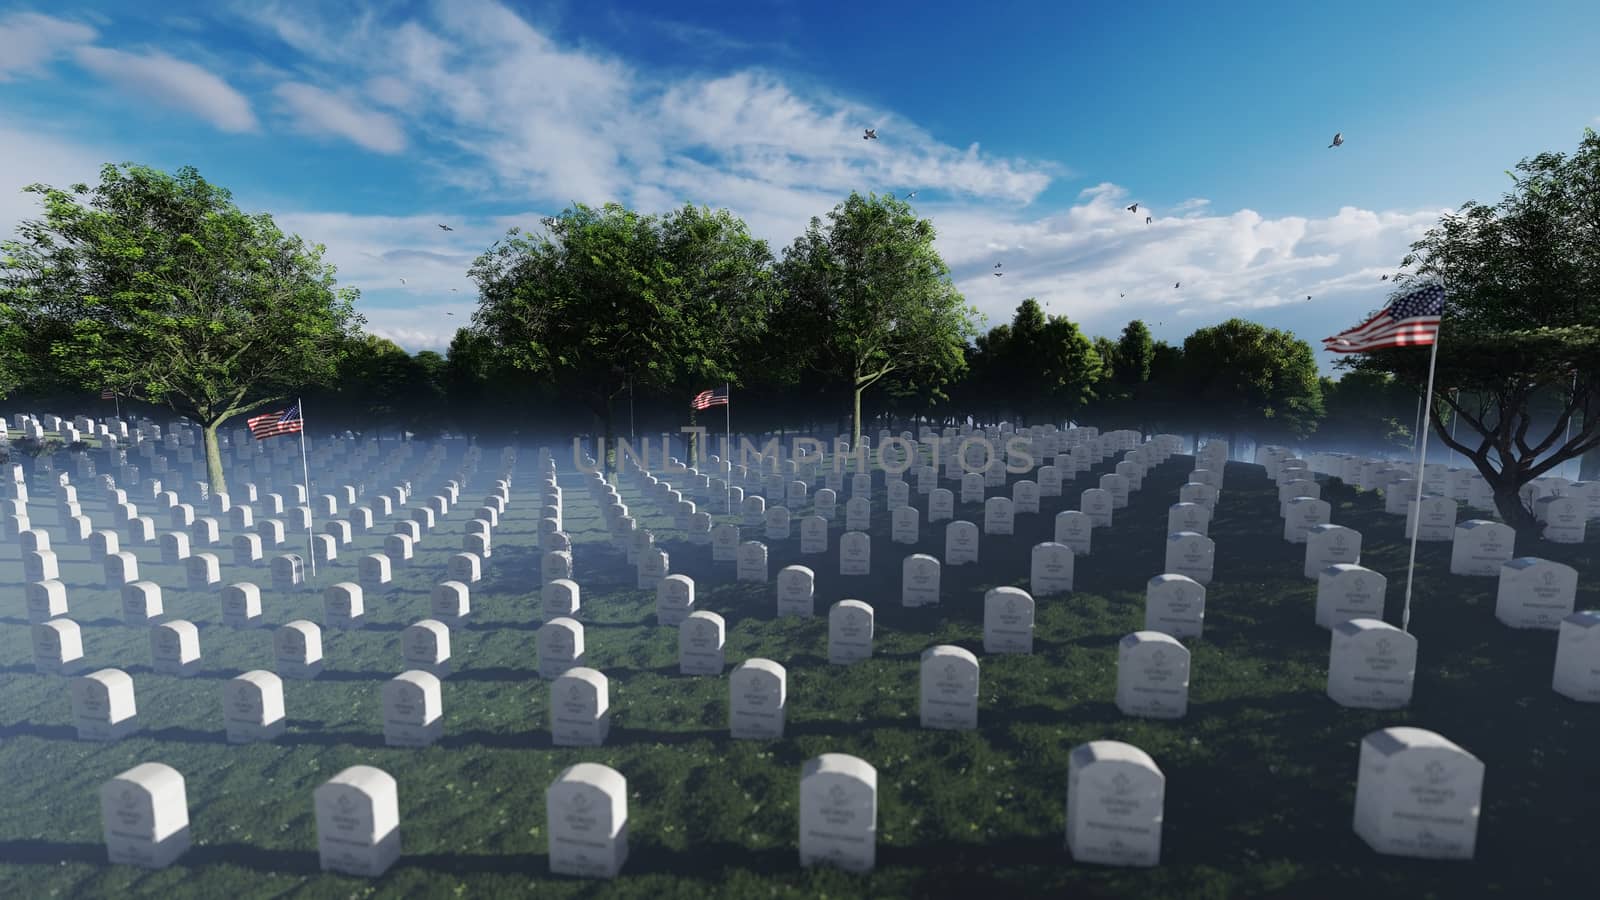 Graves, Headstones and US flags at the Arlington National Cemetery
